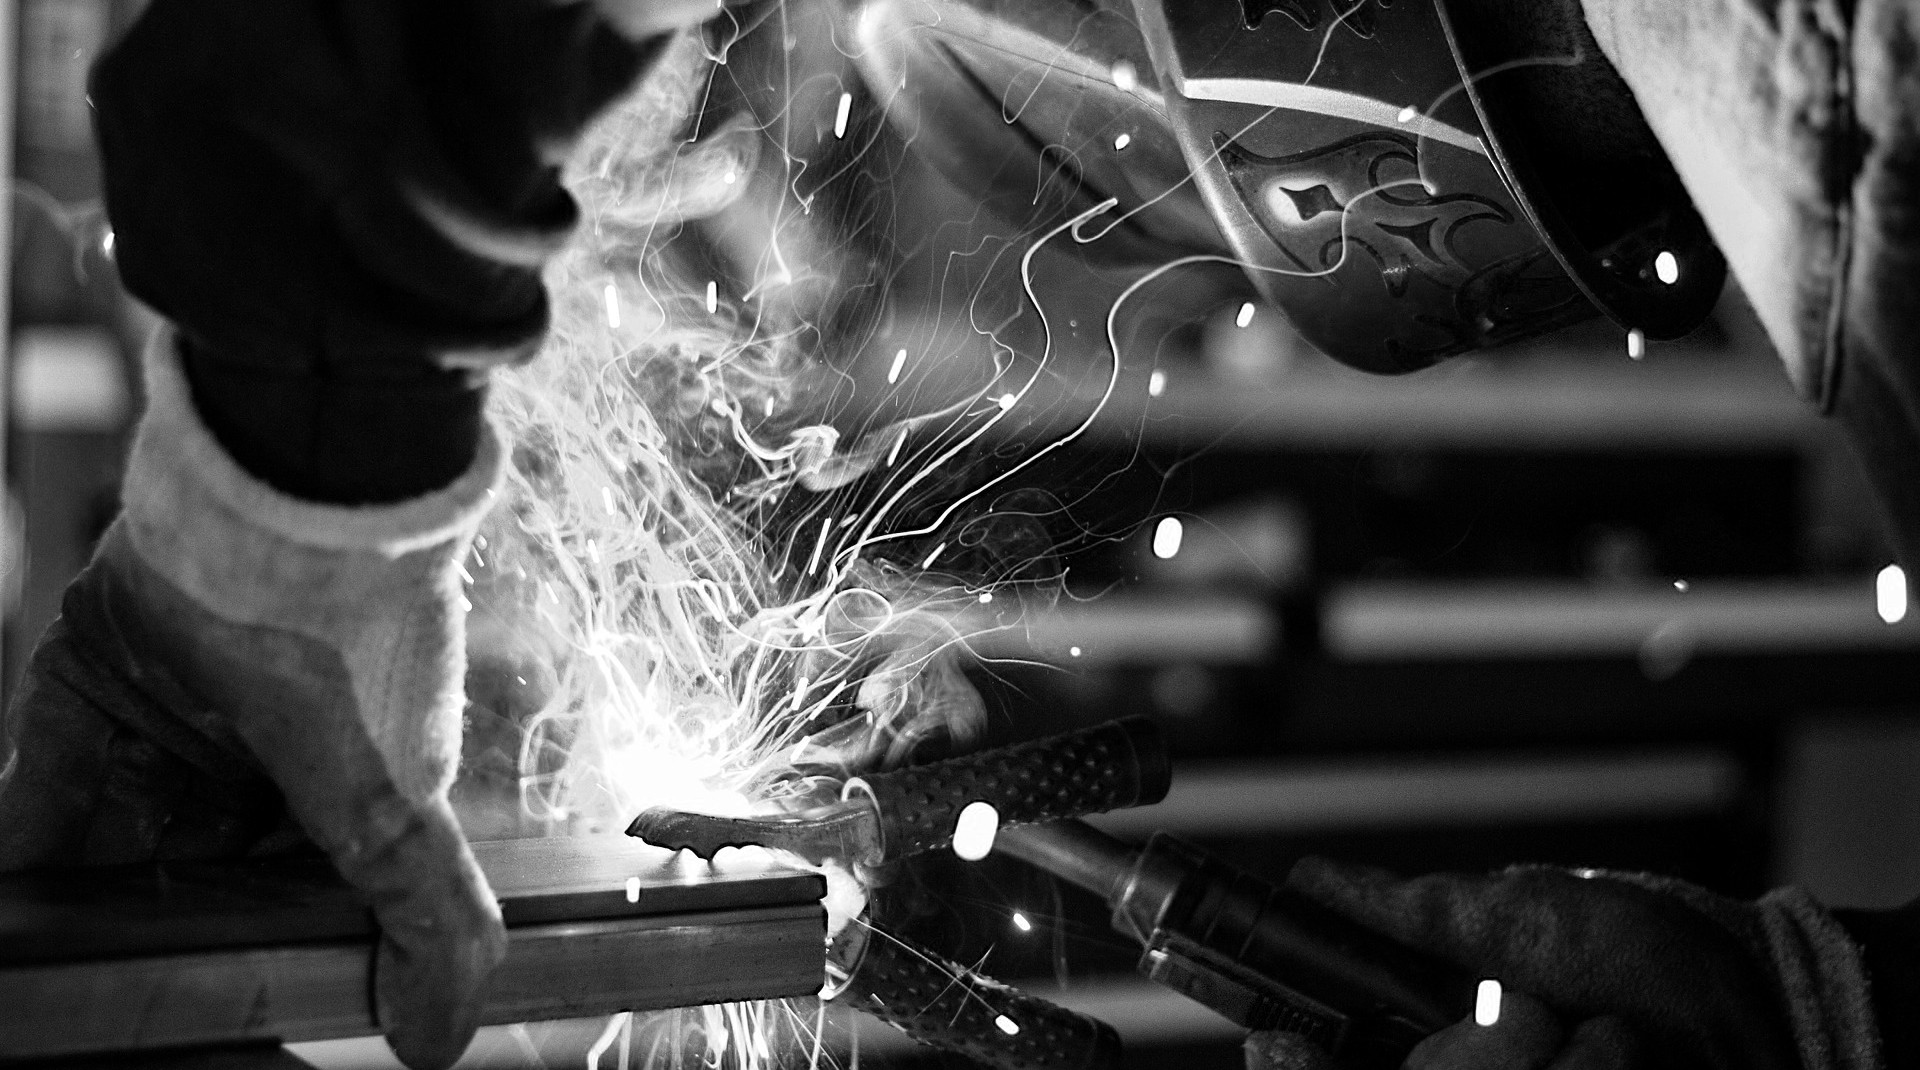 Welding & Brazing Qualifications (Conforms to ASME Codes)